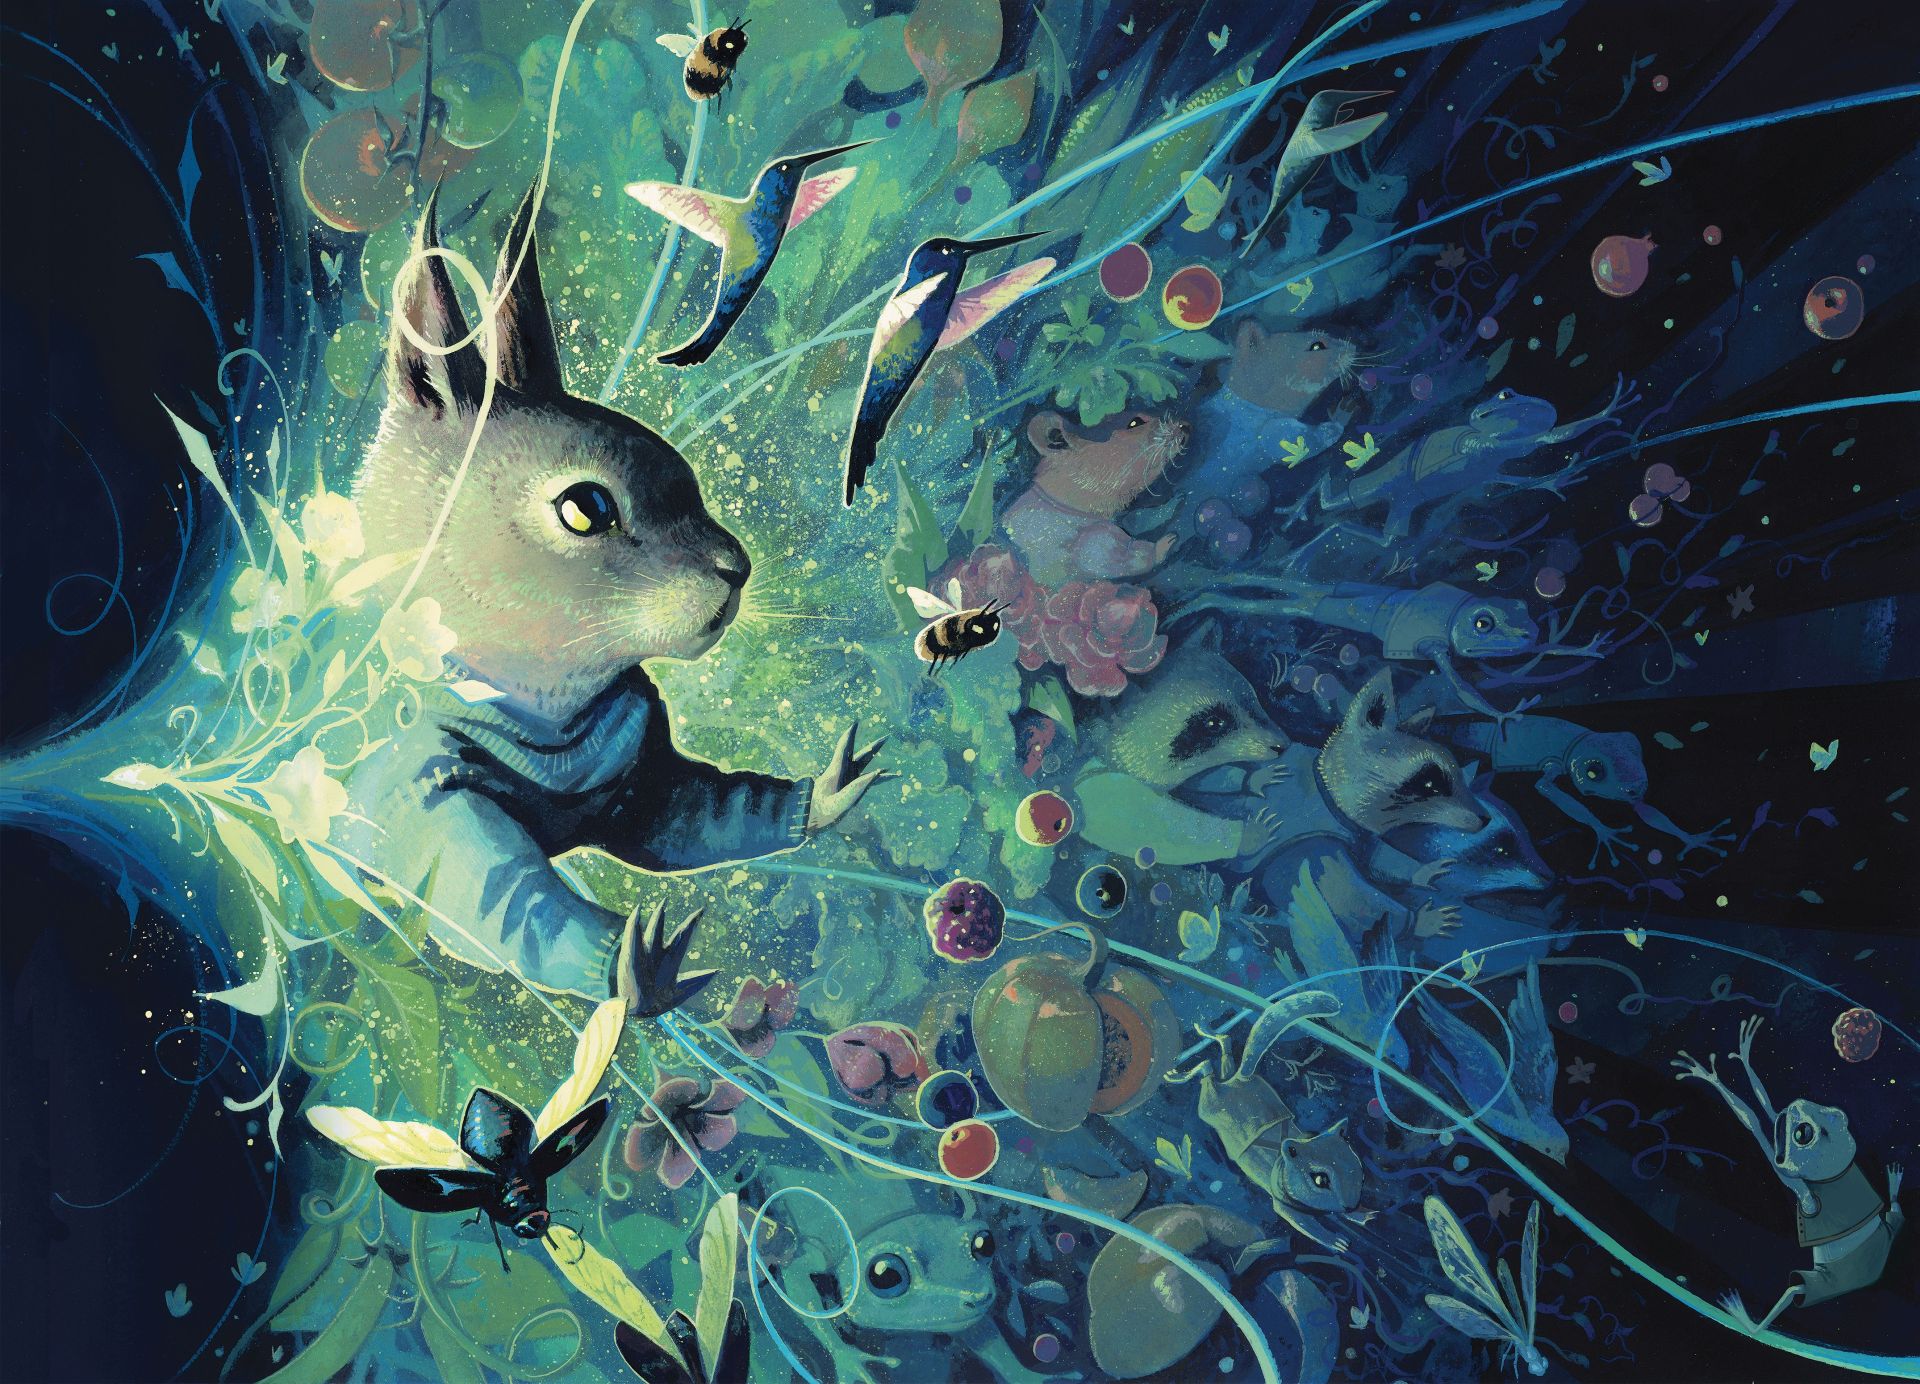  Magic: The Gathering's next main set is going full Watership Down 